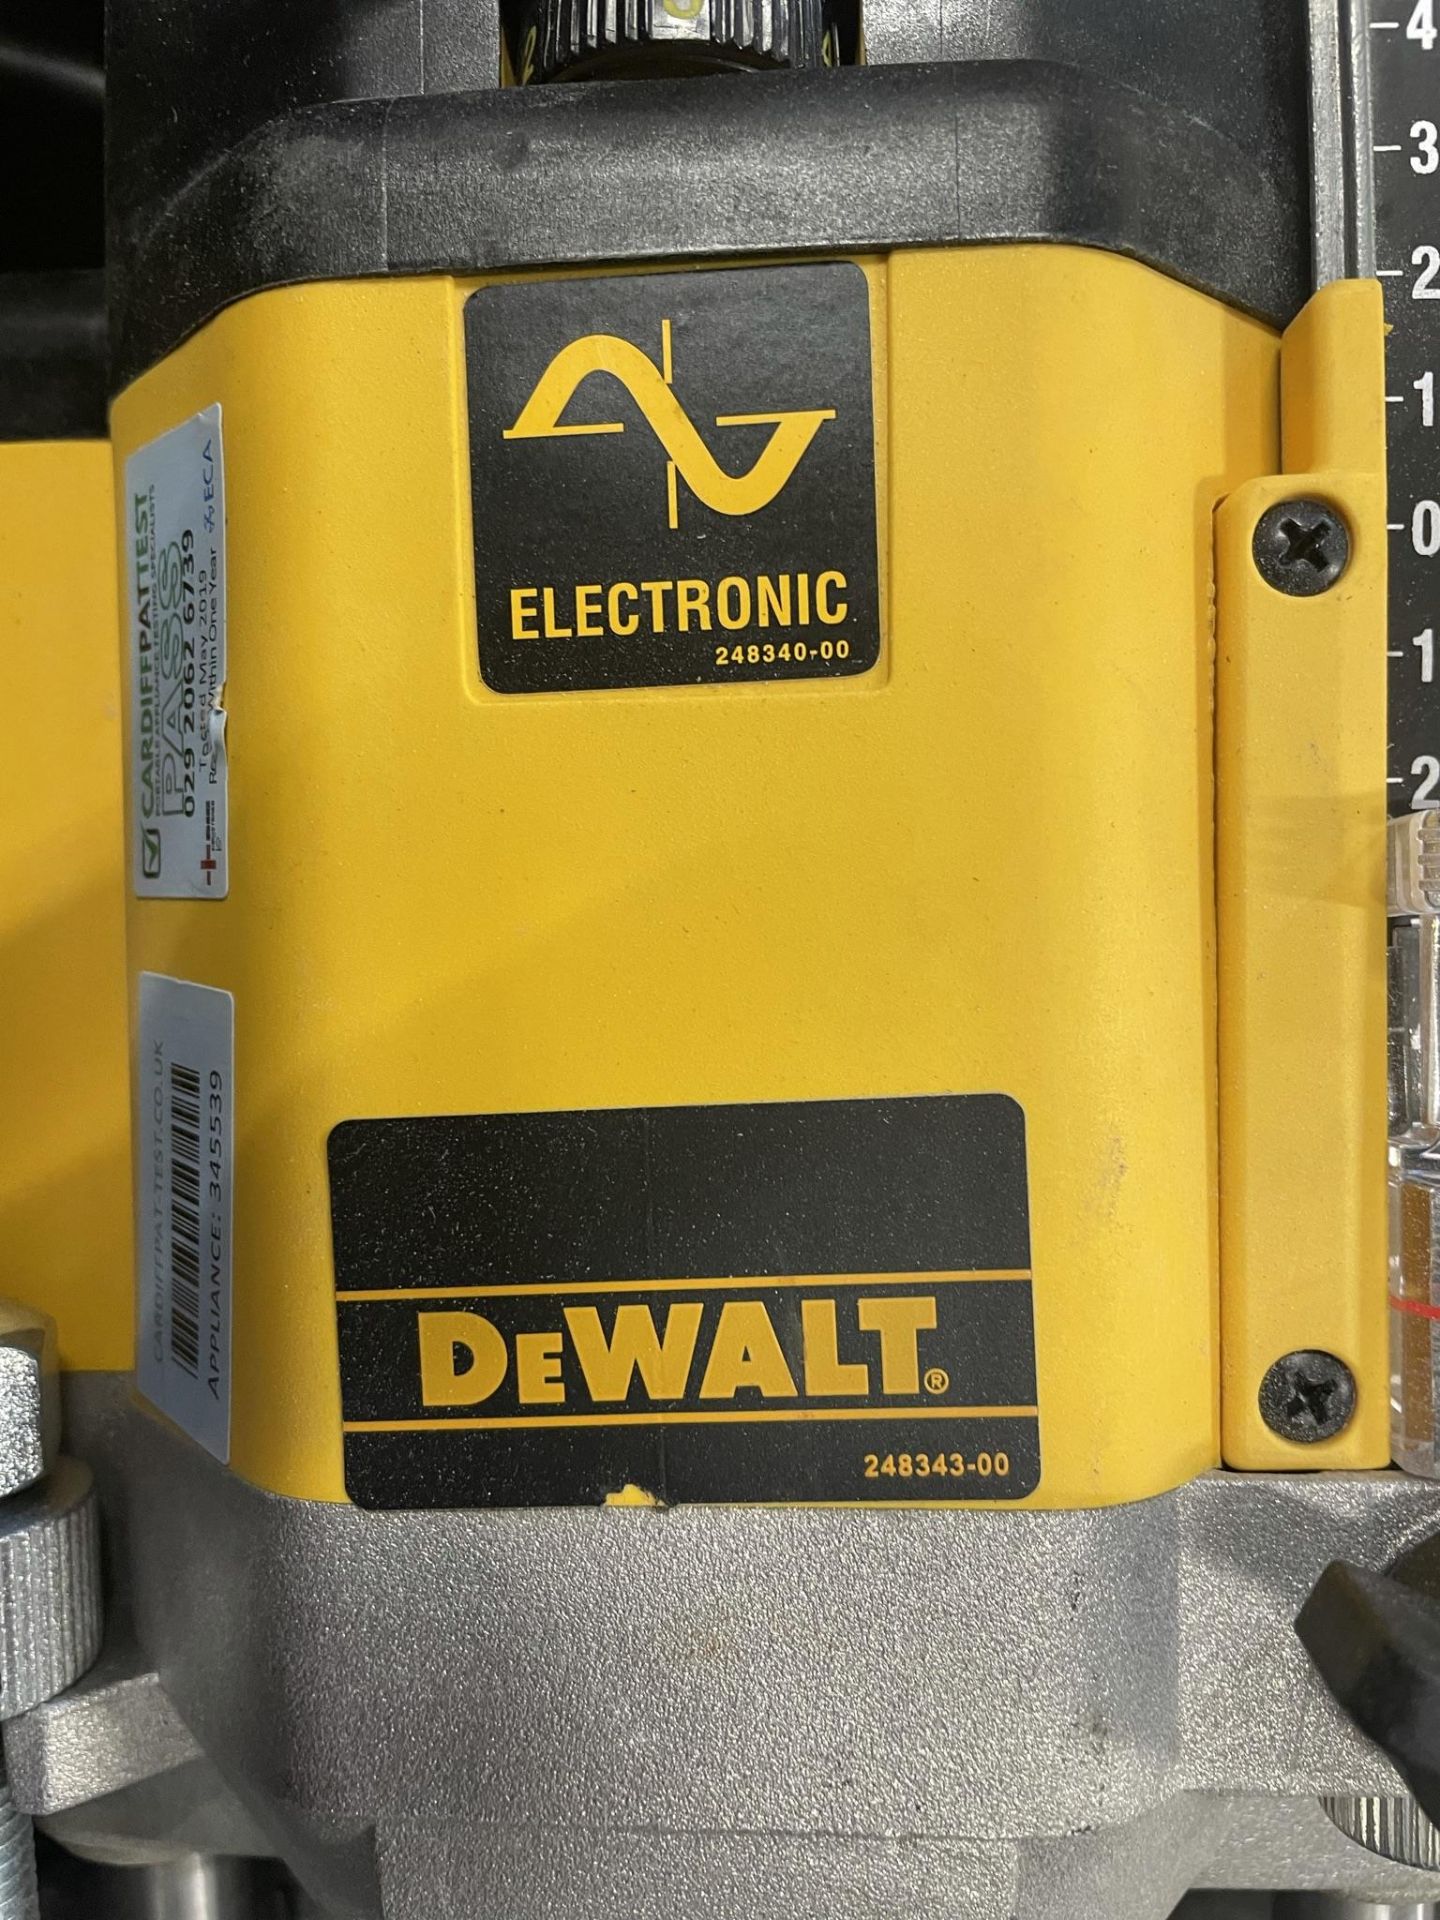 Dewalt DW625E Variable Speed Router in Case - Image 3 of 4